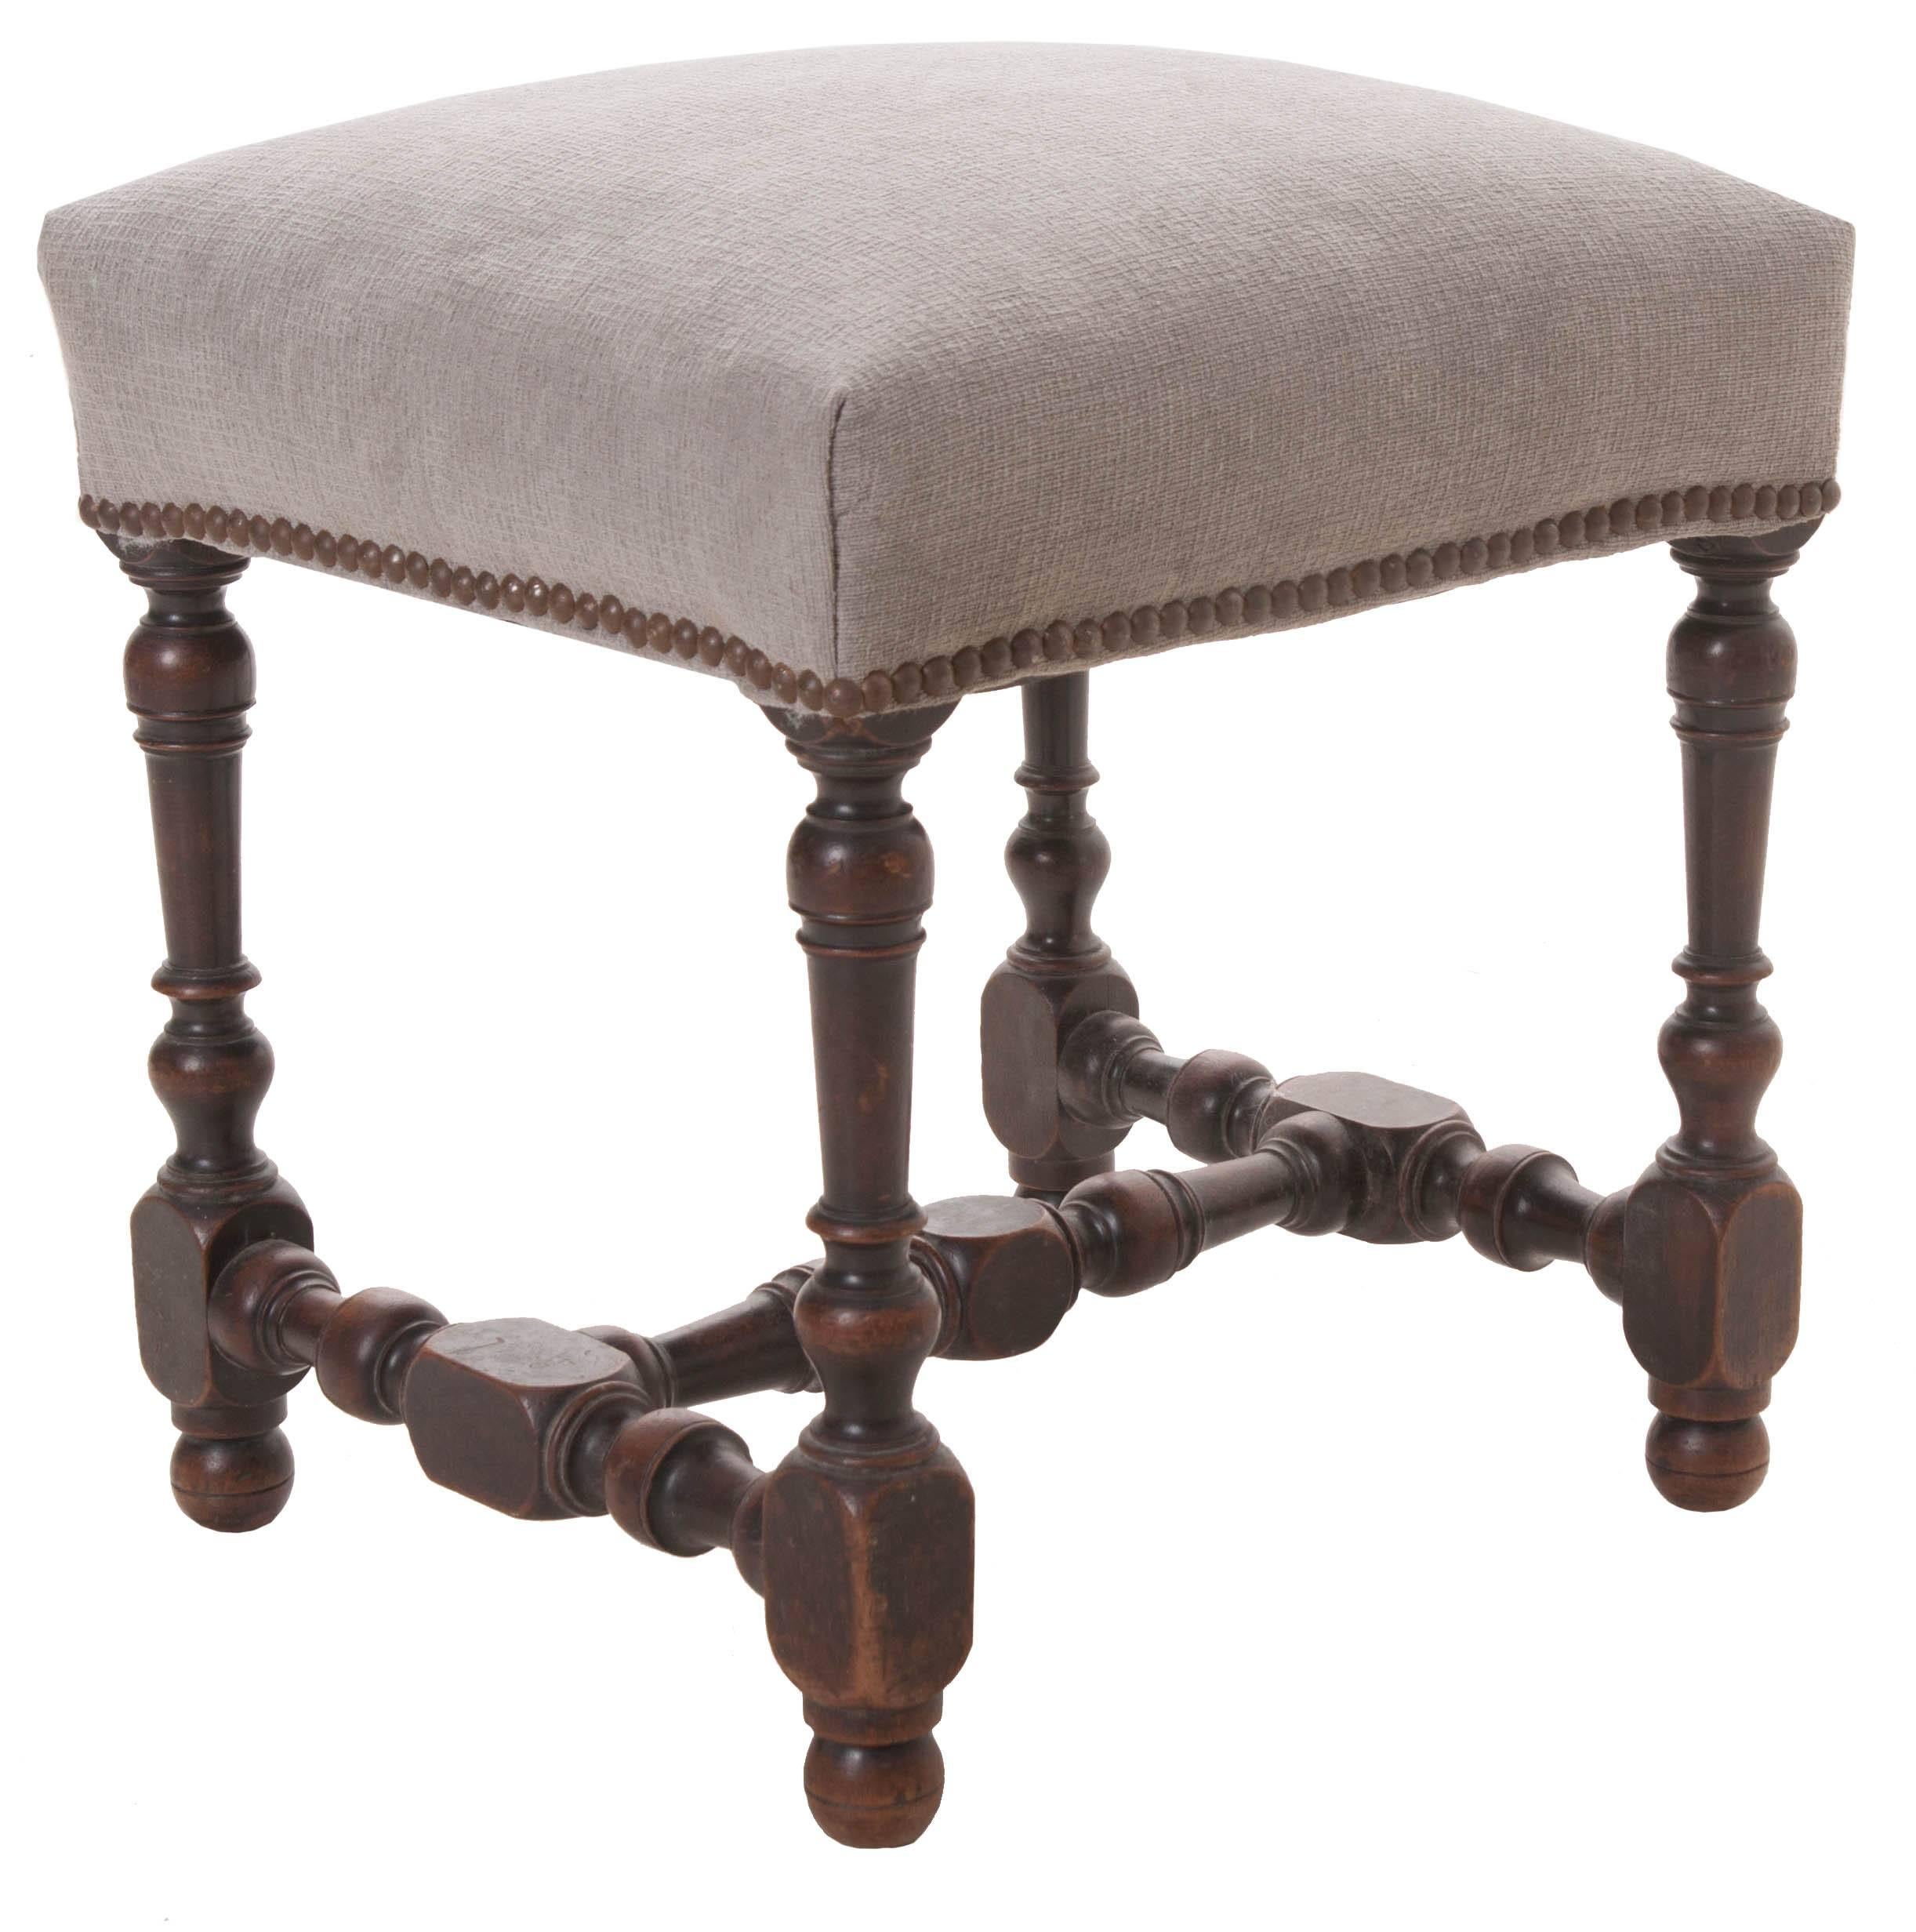 French 19th Century Small Stool